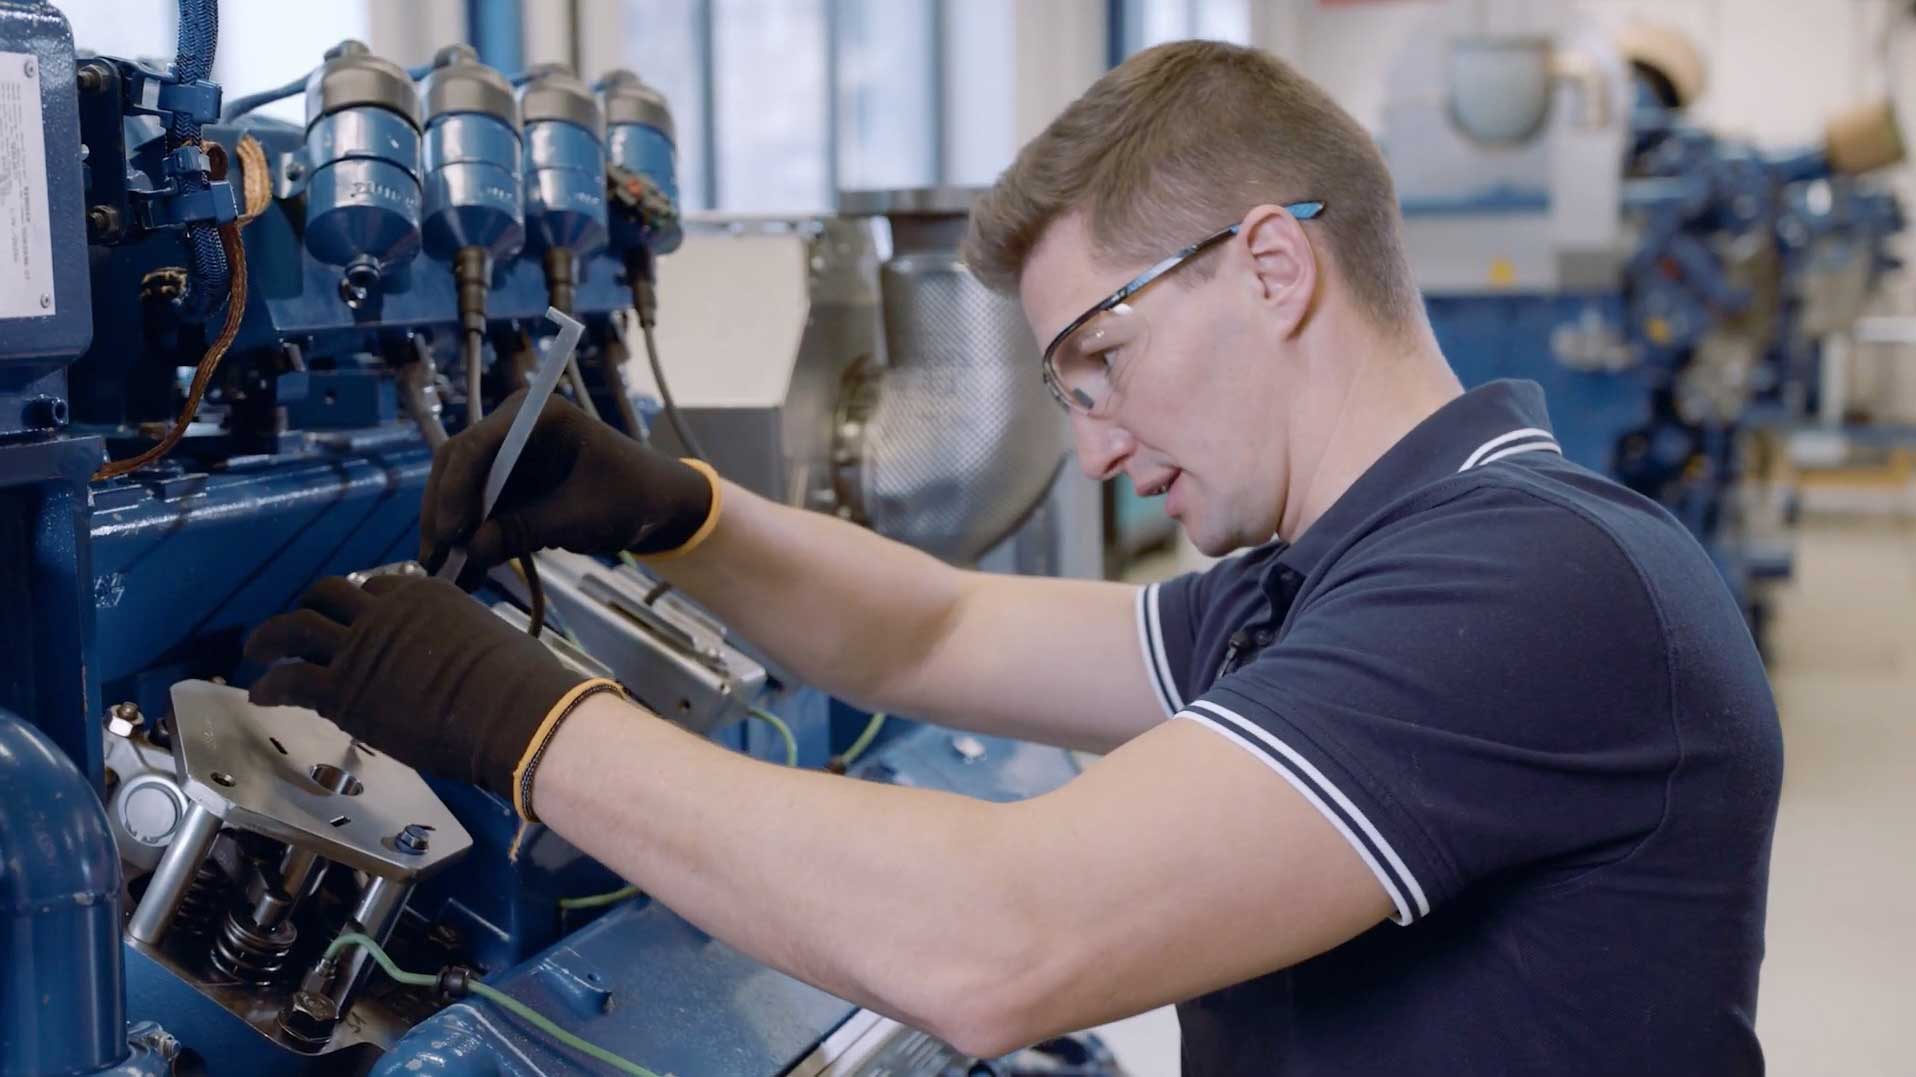 In the new service tutorial video, Alexander Klotz, Technical Trainer at the Learning Center Service in Mannheim, provides instructions on how to measure the valve recession on MWM gas engines.